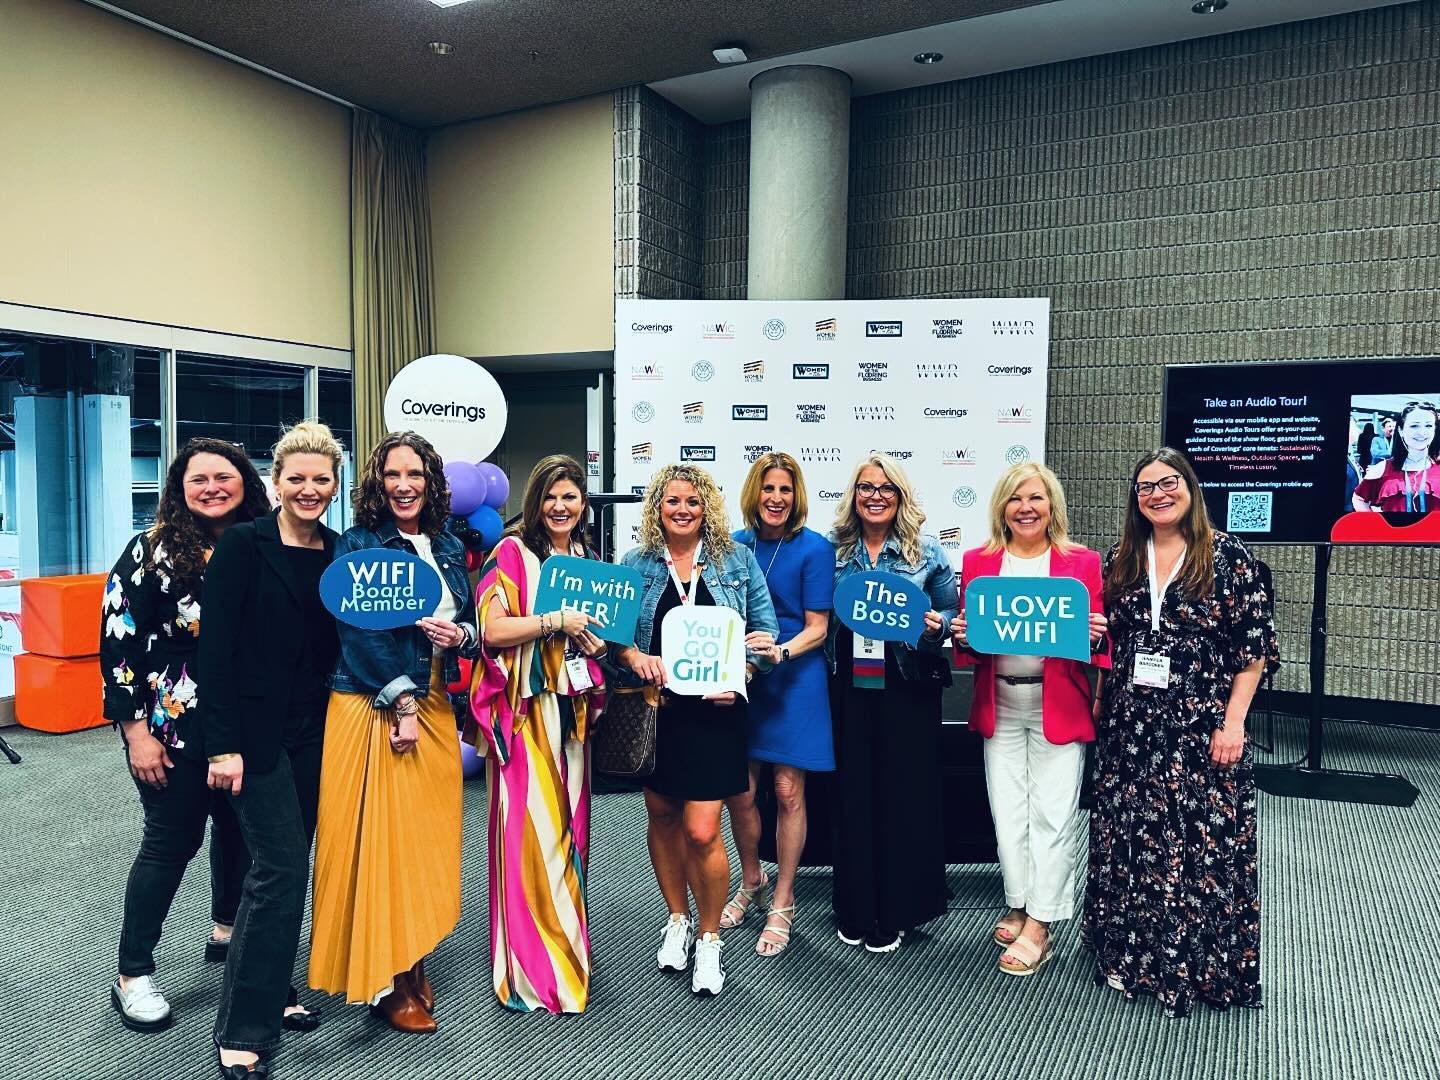 What do these ladies have in common? They are the backbone of WIFI! Thank you to our board members and volunteers for coming out to the WIFI event Her Story @coveringsshow this week!

l-r: Andrea Blackbourn @floor_covering_ind_foundation, Tanja Kern 